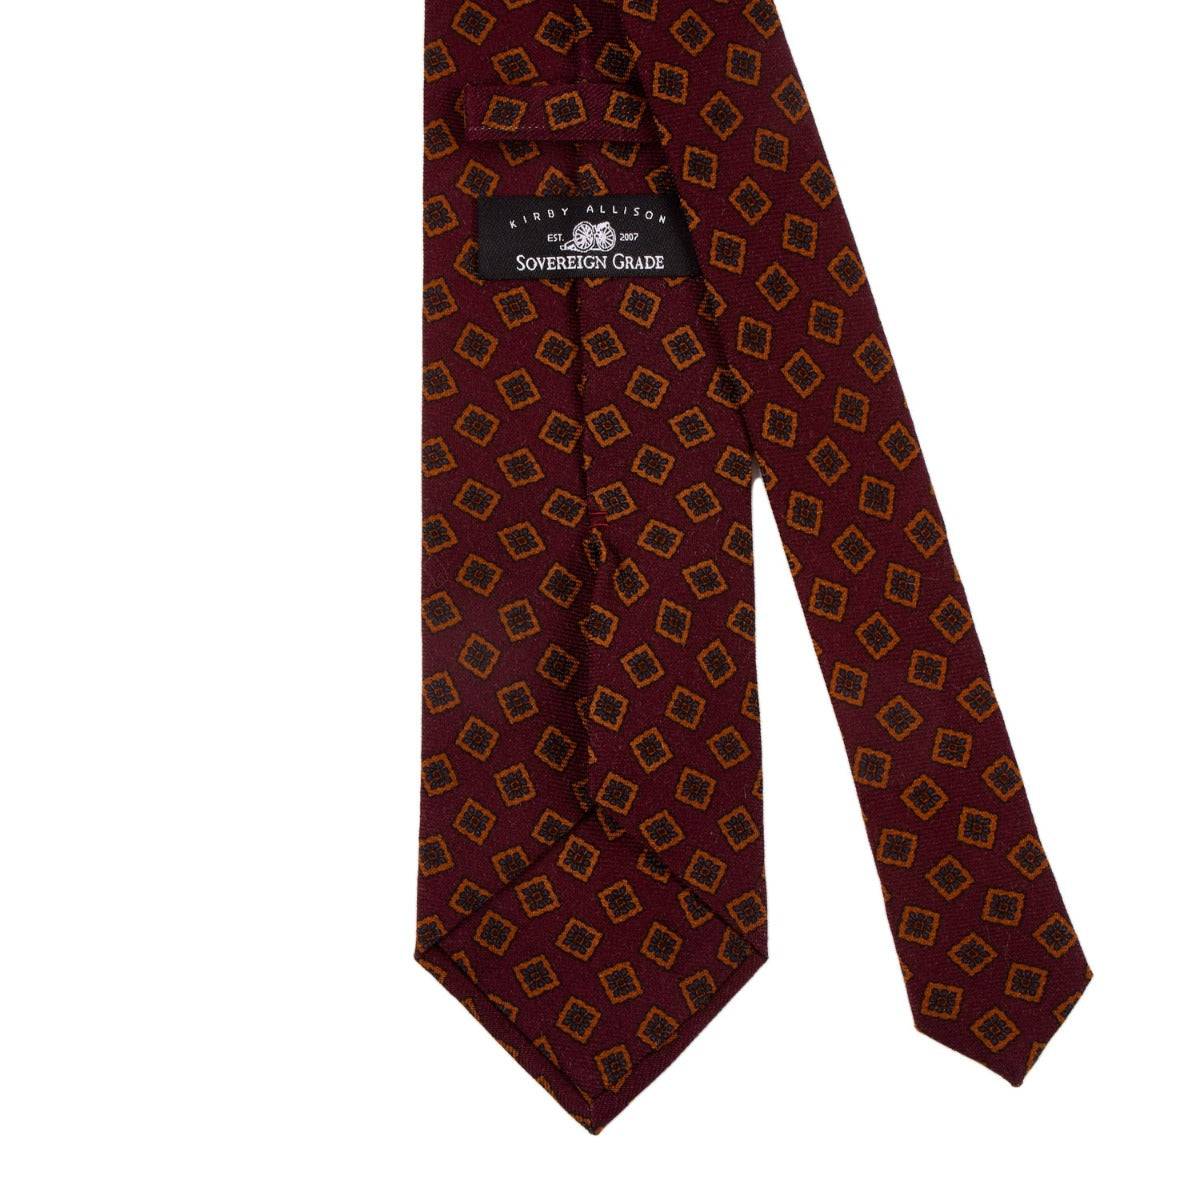 A Sovereign Grade Burgundy Tossed Square Wool Challis Tie with a red and gold pattern, handmade in the United Kingdom by KirbyAllison.com.